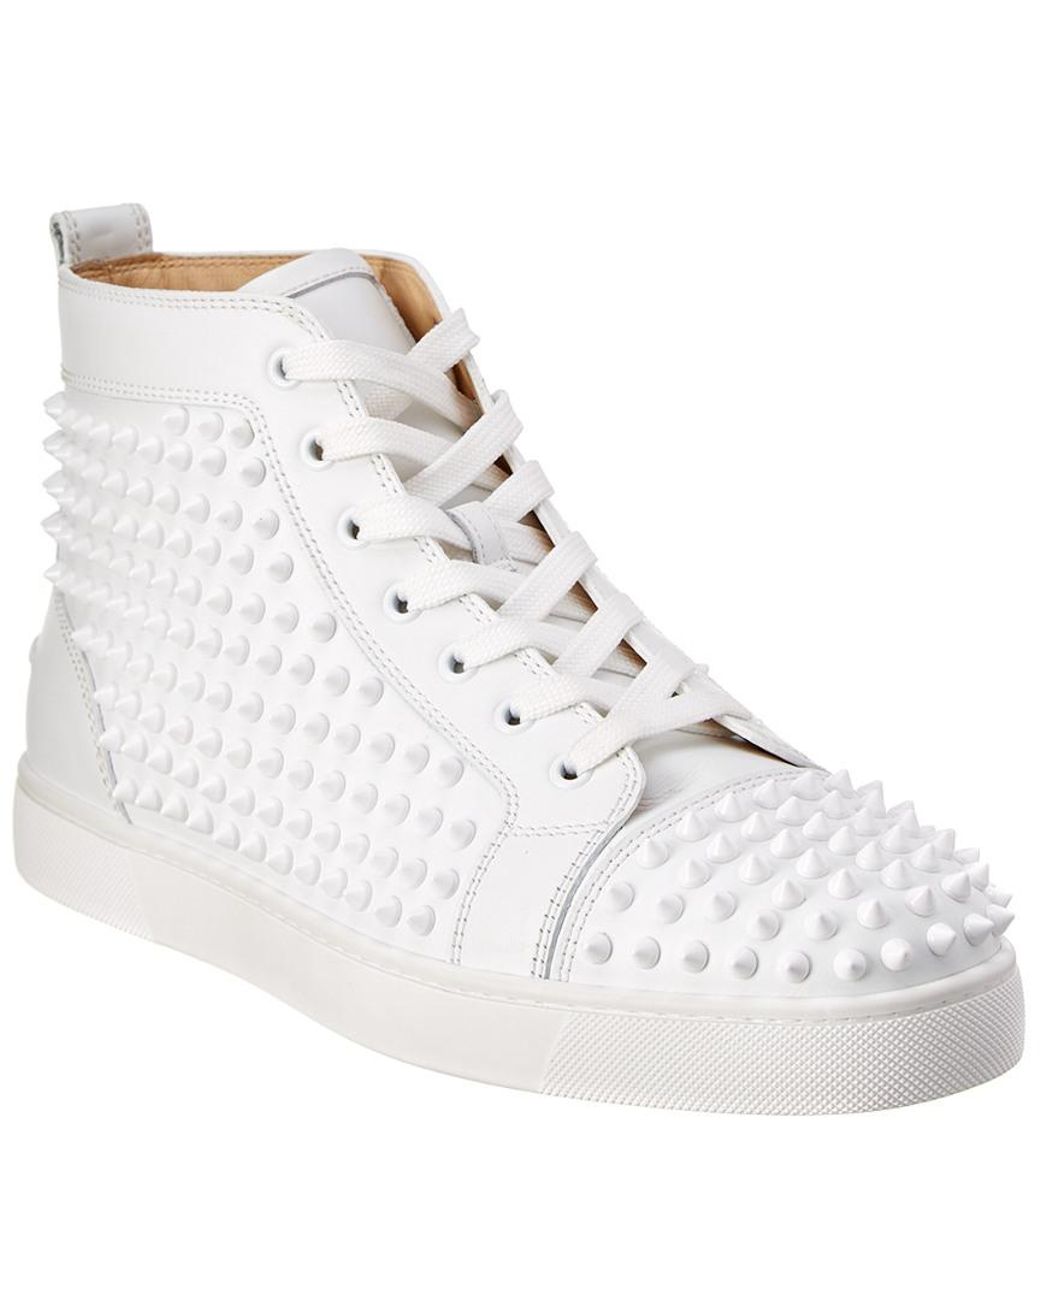 Chia sẻ 63+ về louis vuitton spiked sneakers - cdgdbentre.edu.vn